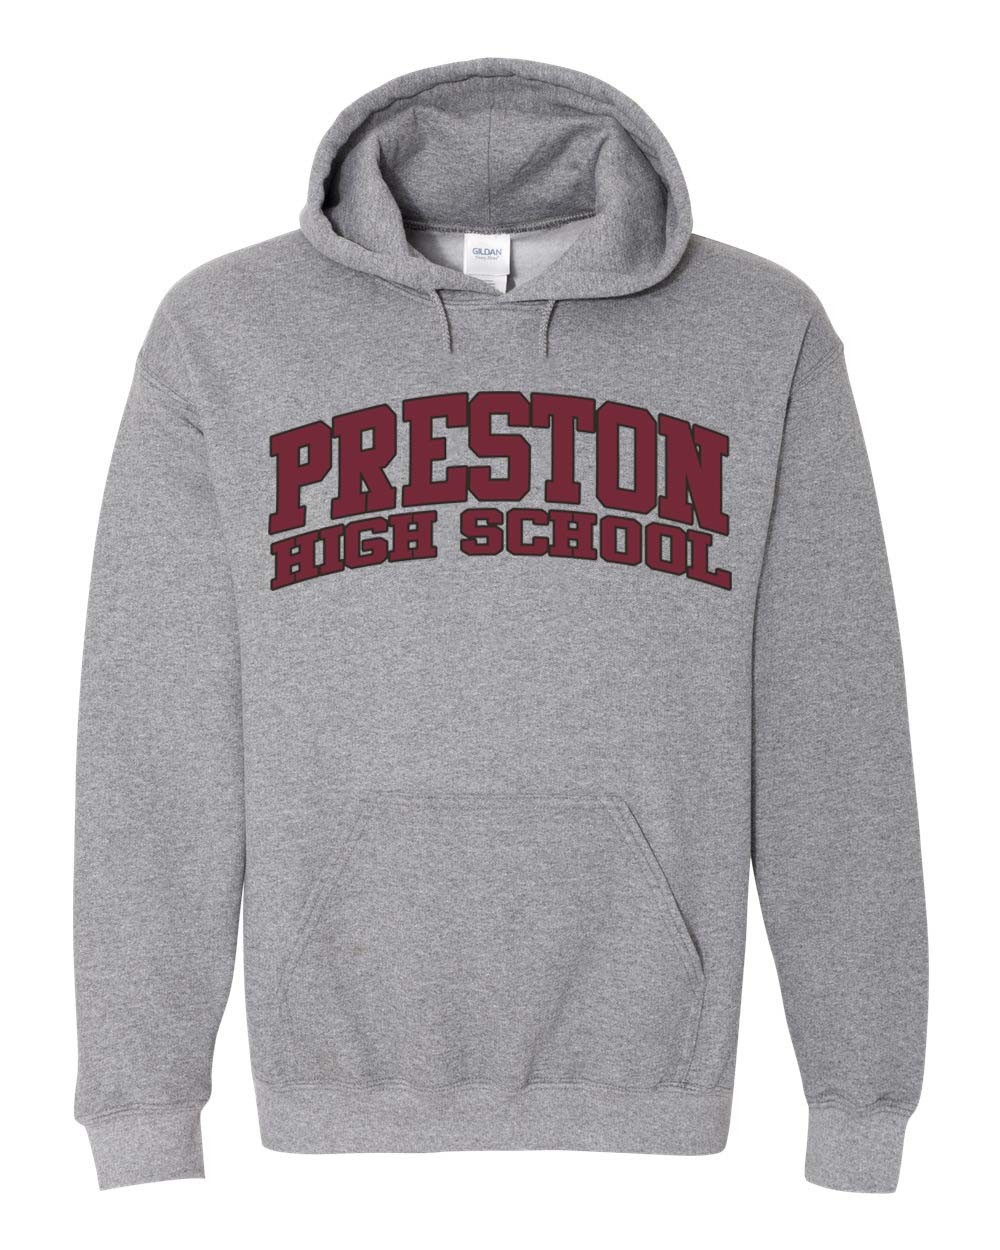 PHS Staff Hoodie w/ Maroon Logo - Please allow 2-3 Weeks for Delivery